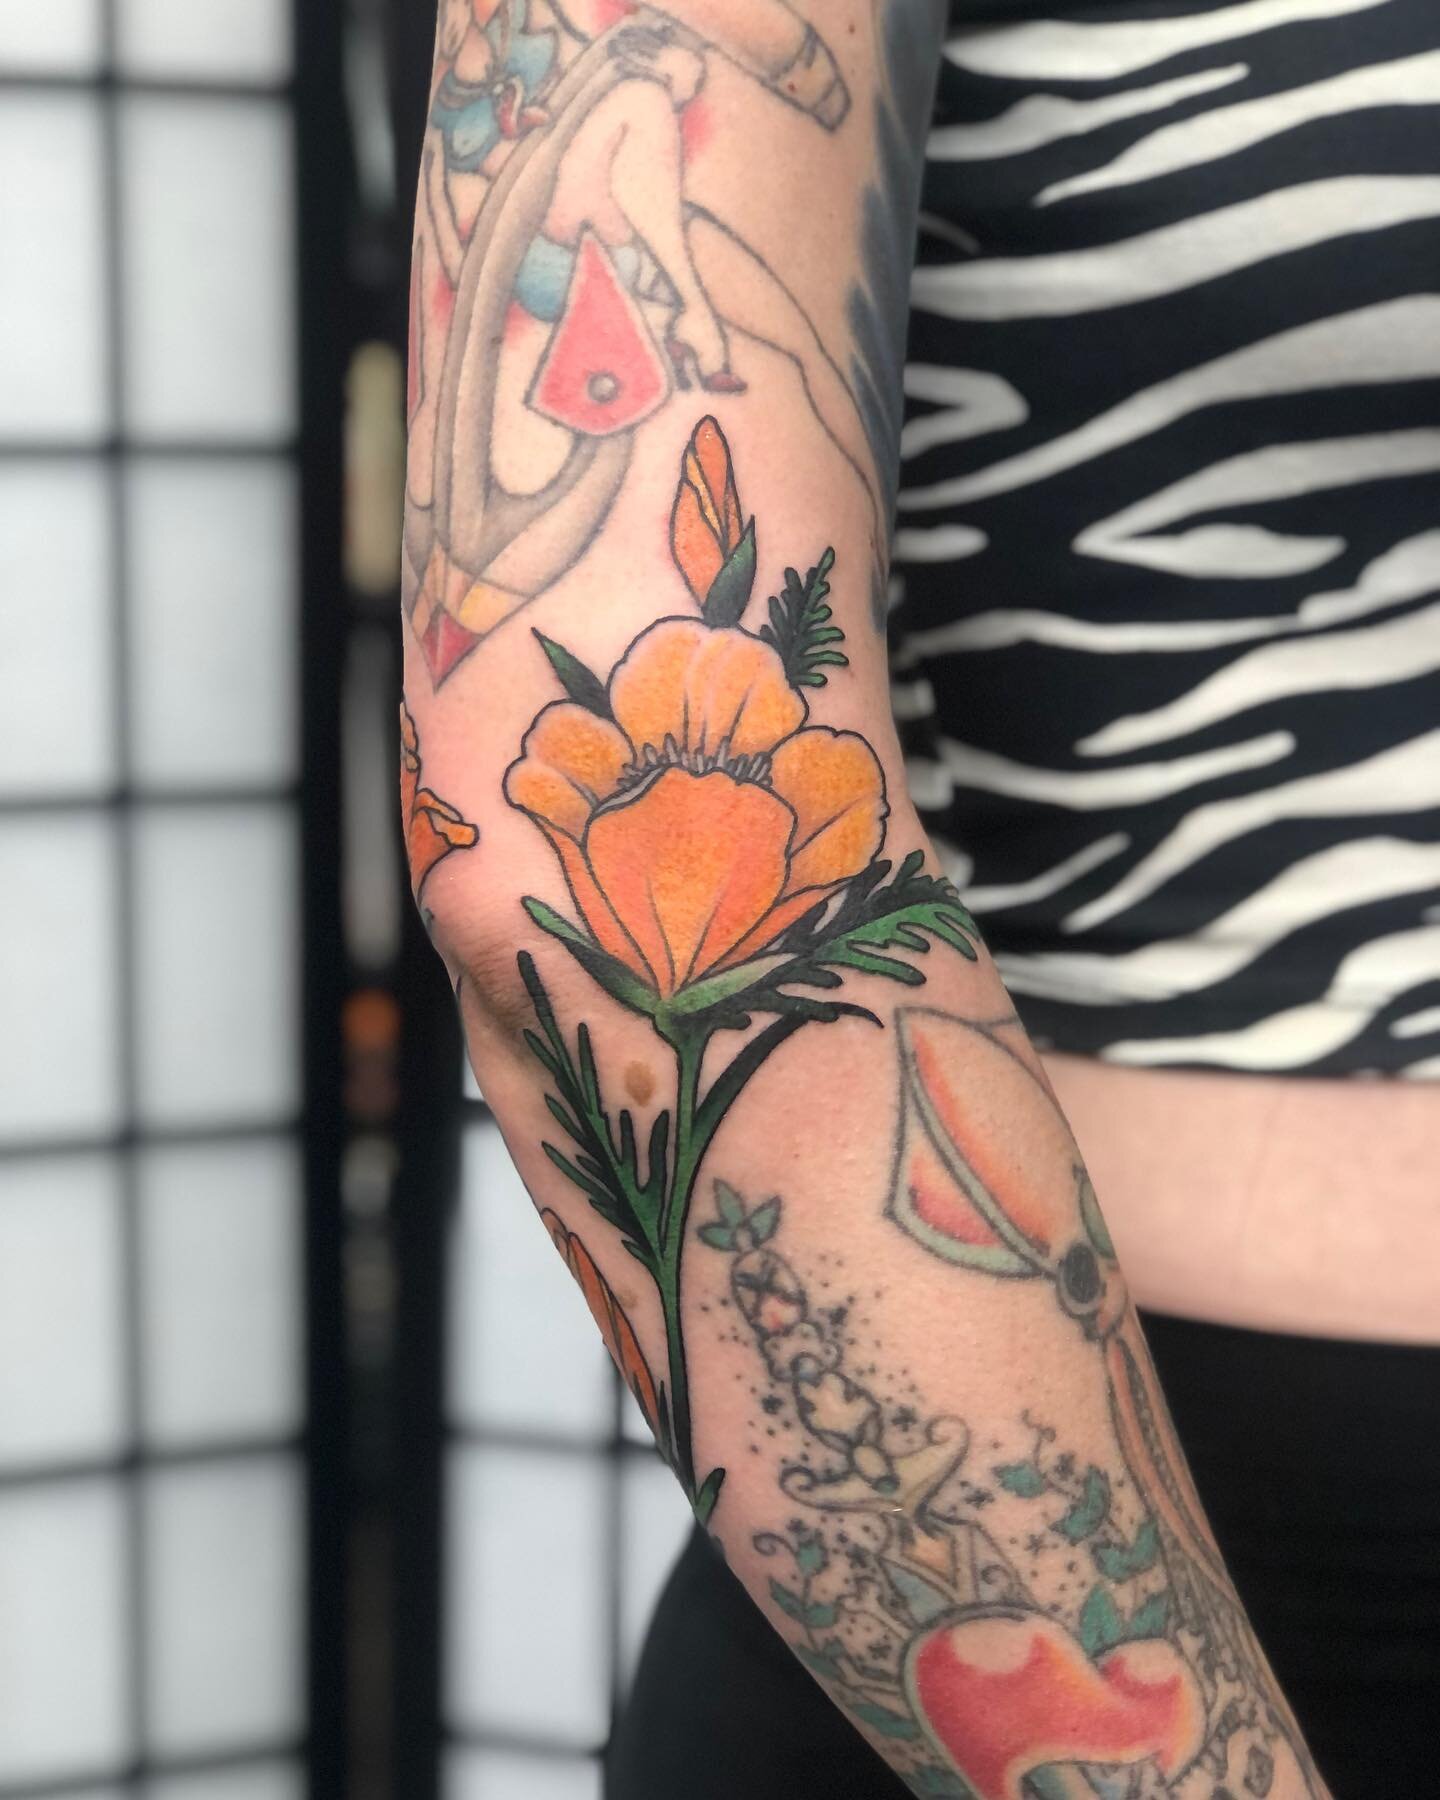 Some California Poppies for Paige. Dankness courtesy of @magic_pigment_co